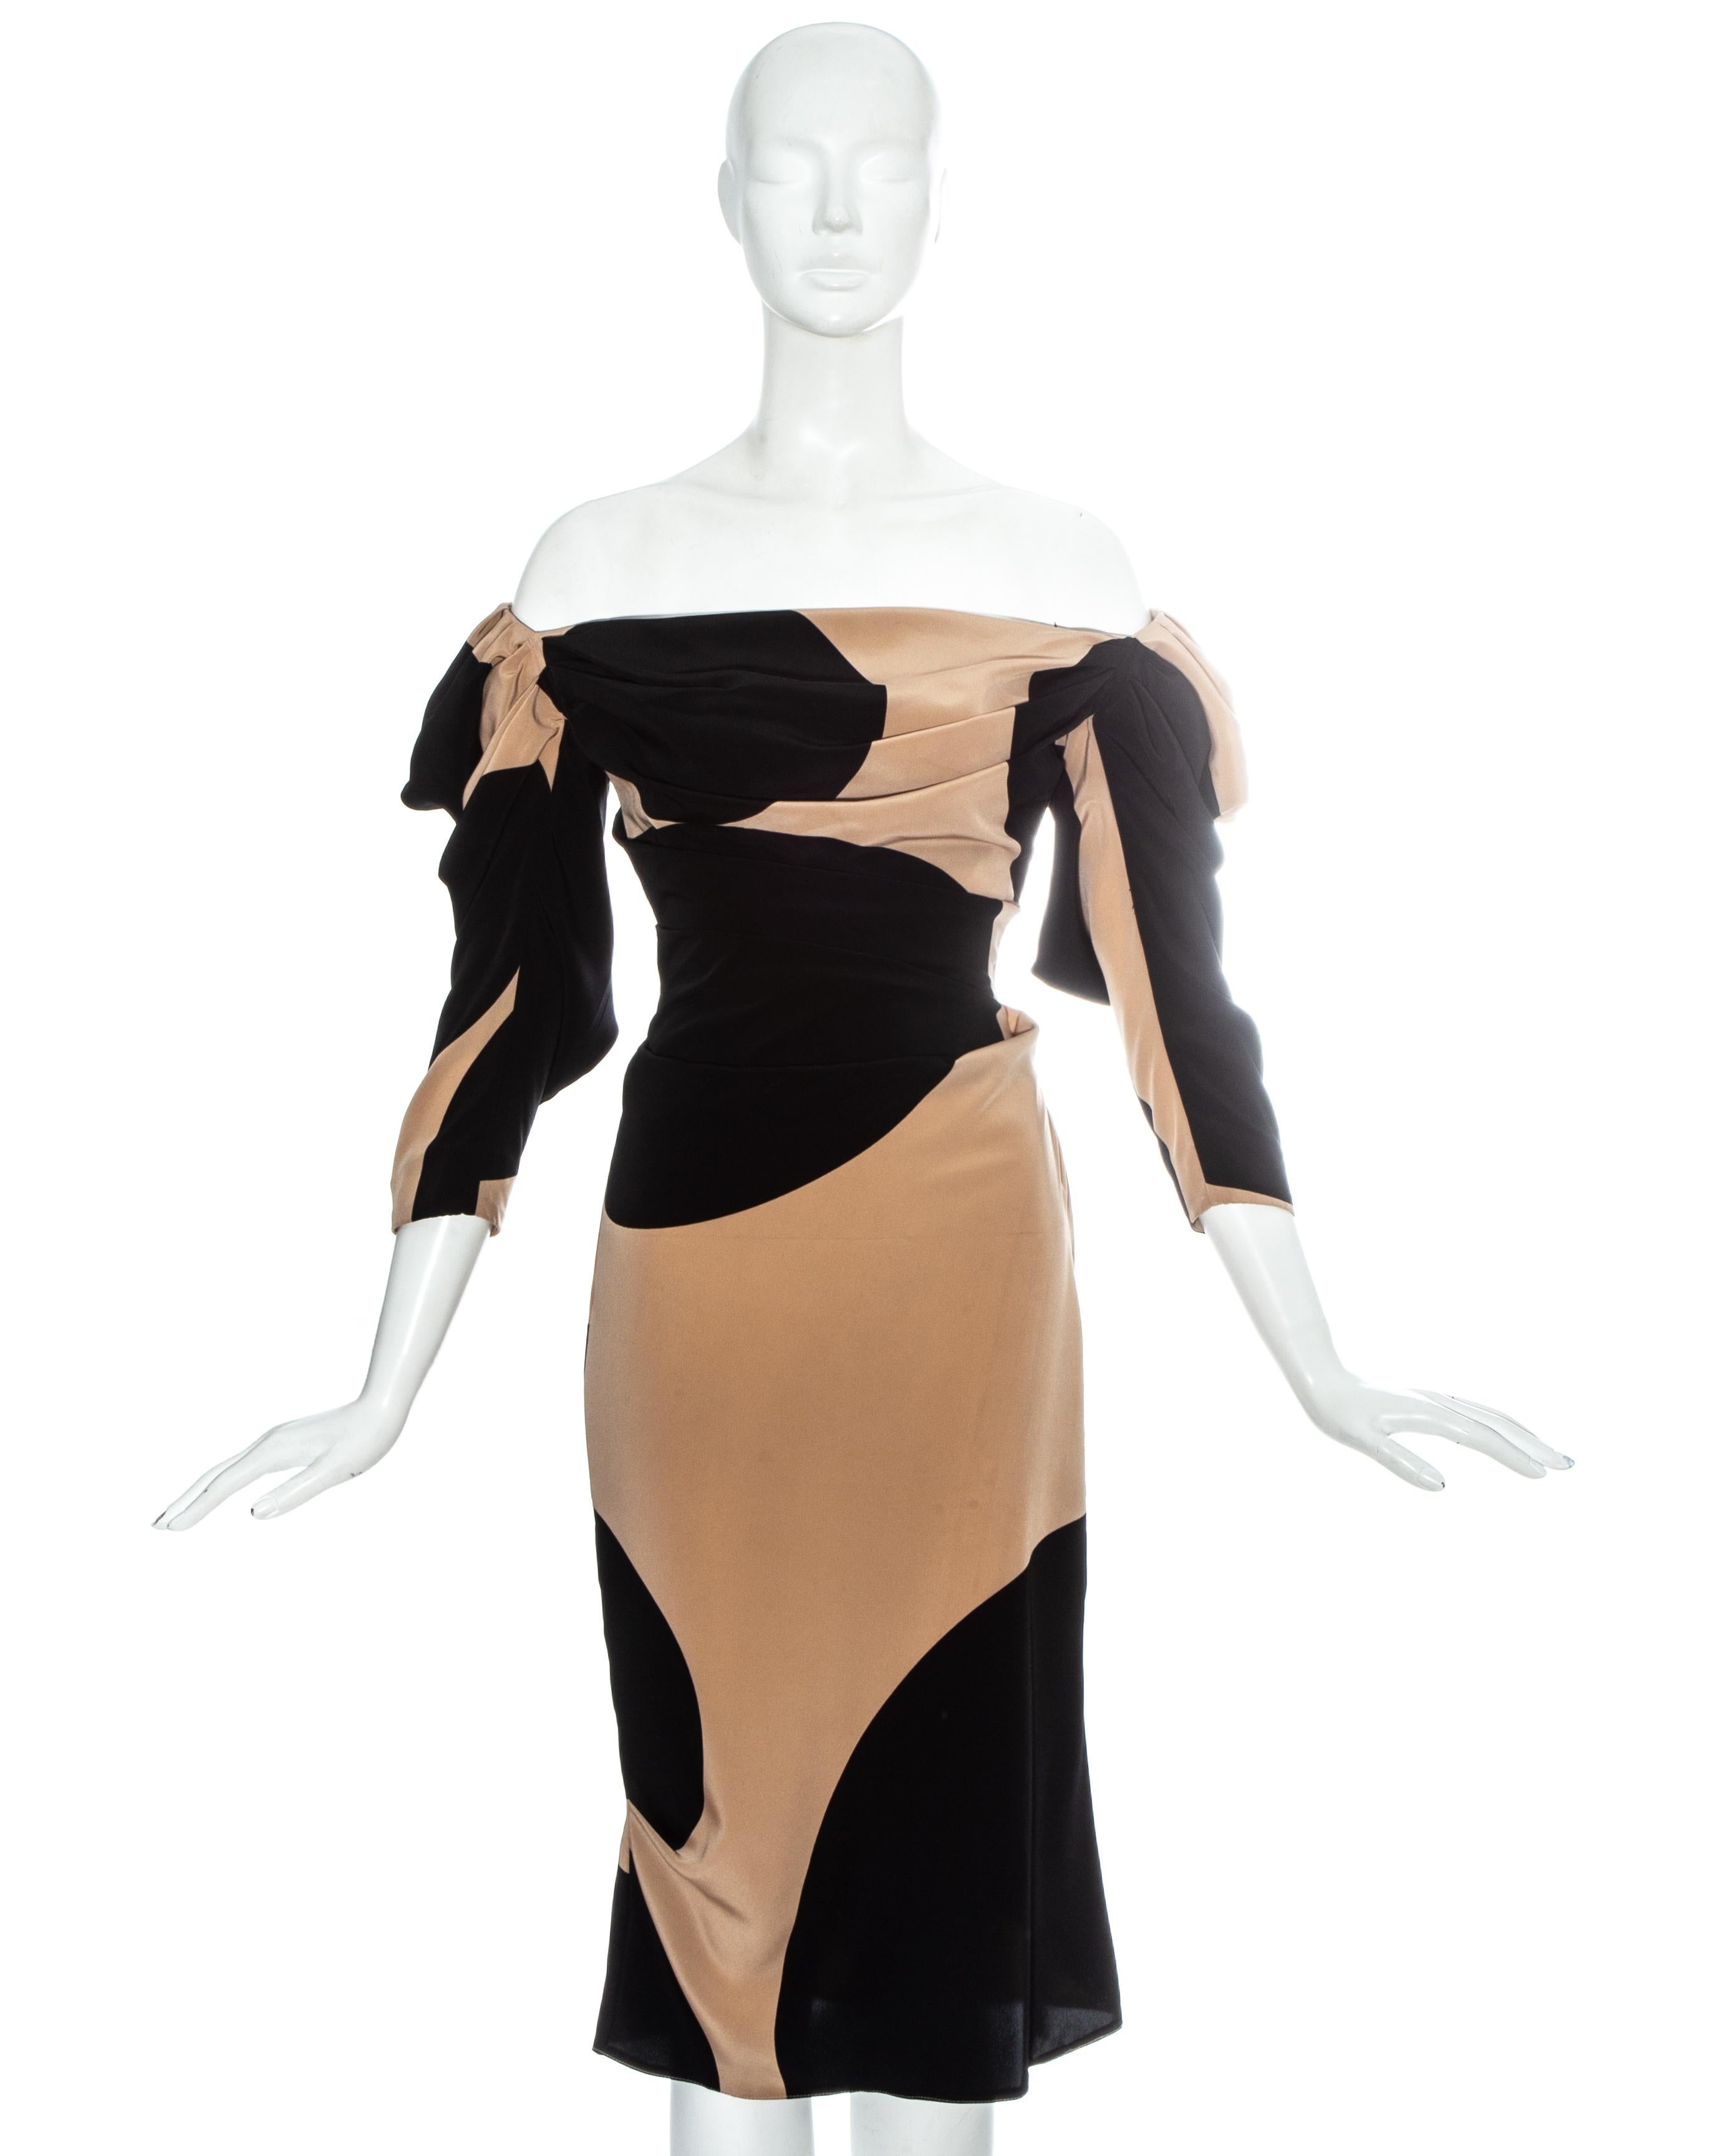 Vivienne Westwood cow print nude and black silk mid-length evening dress with built-in corset and draped off-shoulder neckline

Spring-Summer 1999